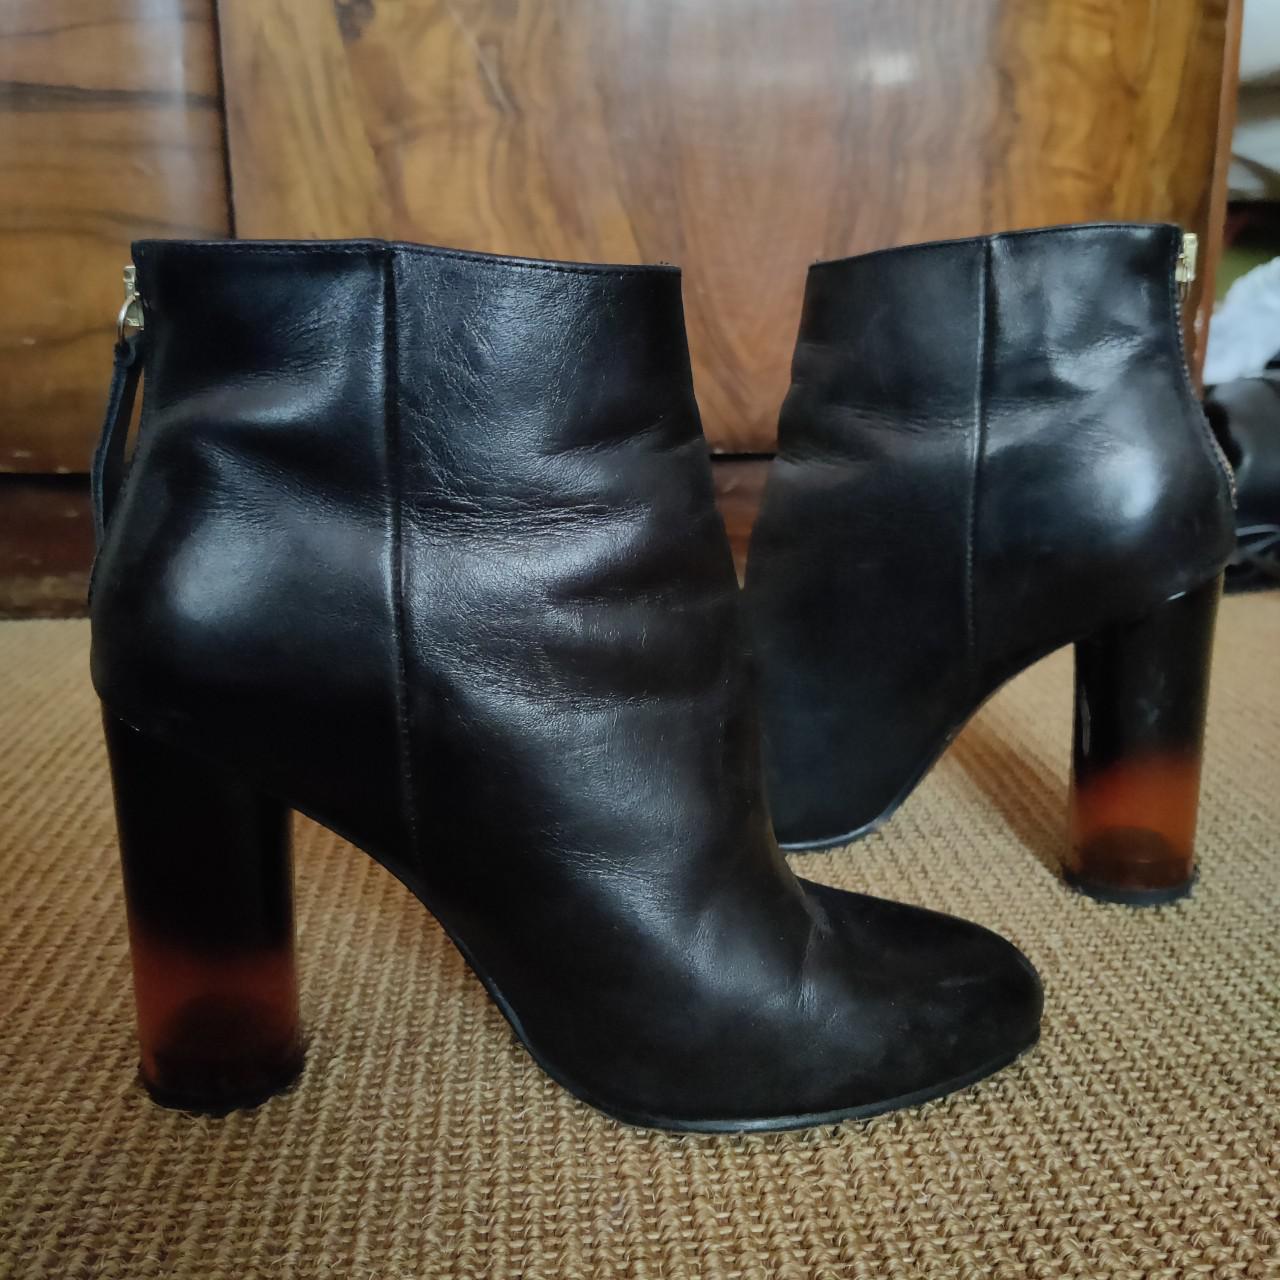 AMAZING black leather ankle boots from Office with... - Depop